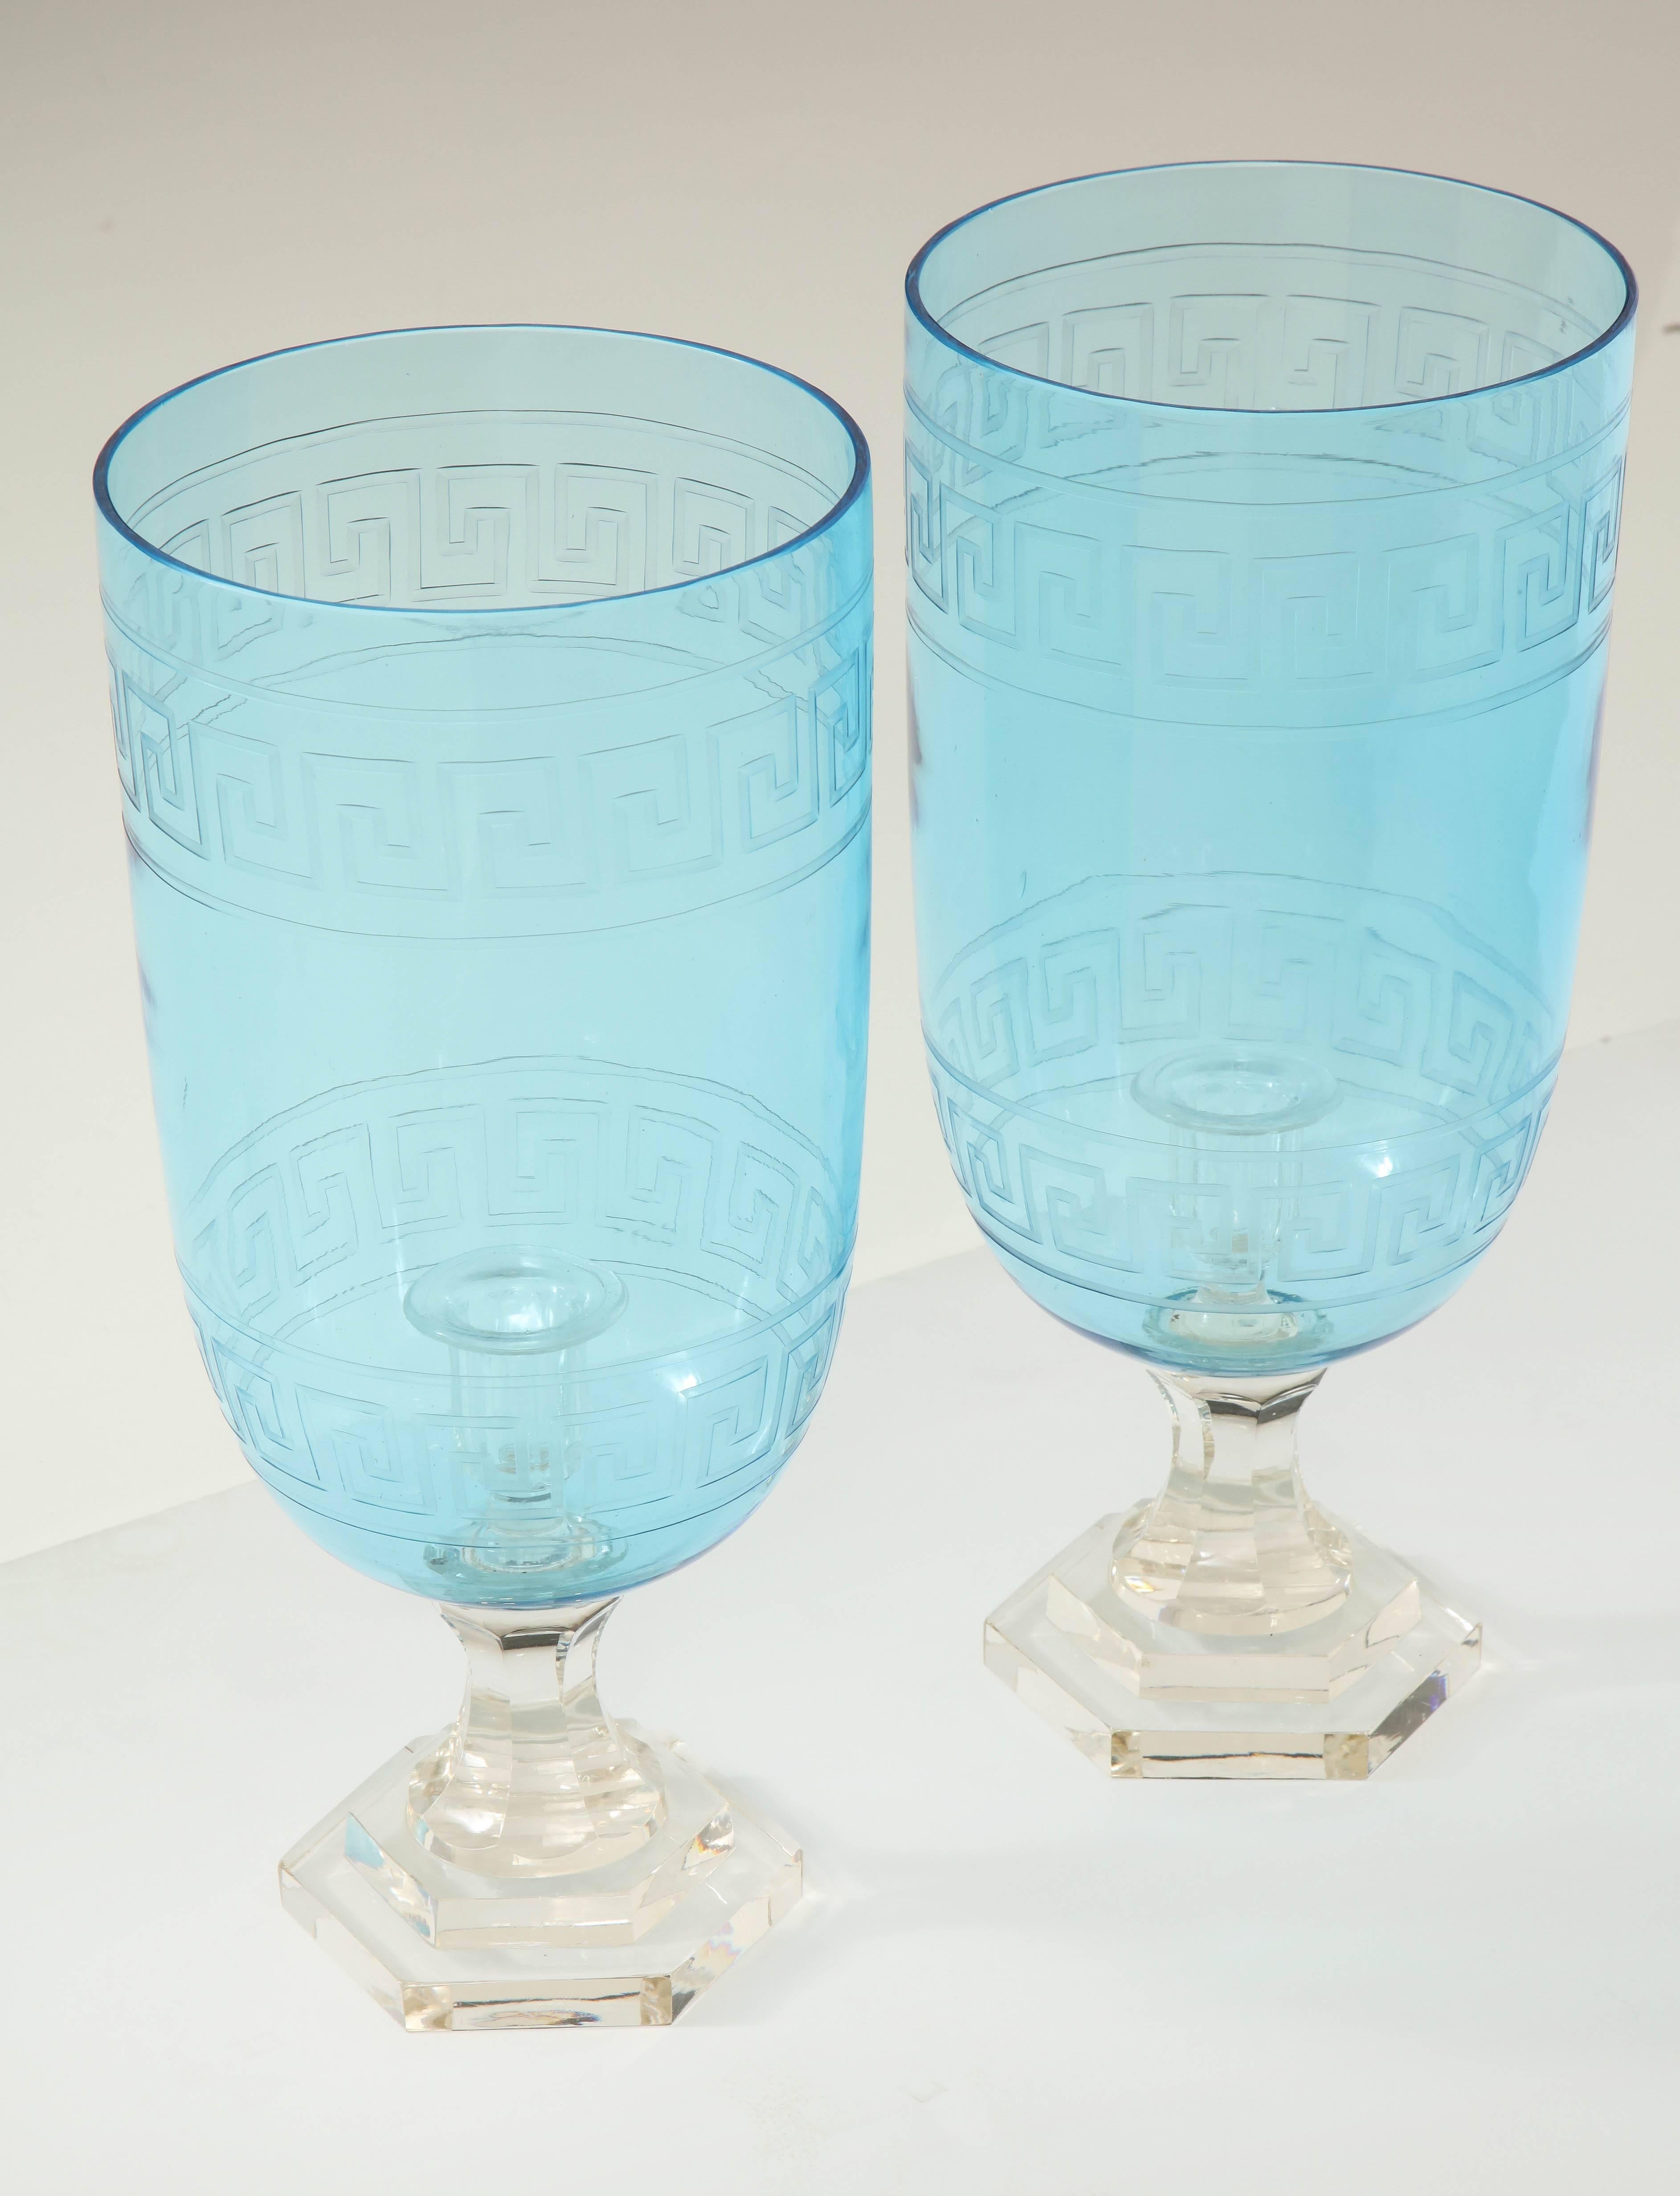 A pair of glass hurricane candleholders in a stunning blue with an etched Greek key design on a clear glass pedestal. Perfect on a console, mantel or centrepiece.